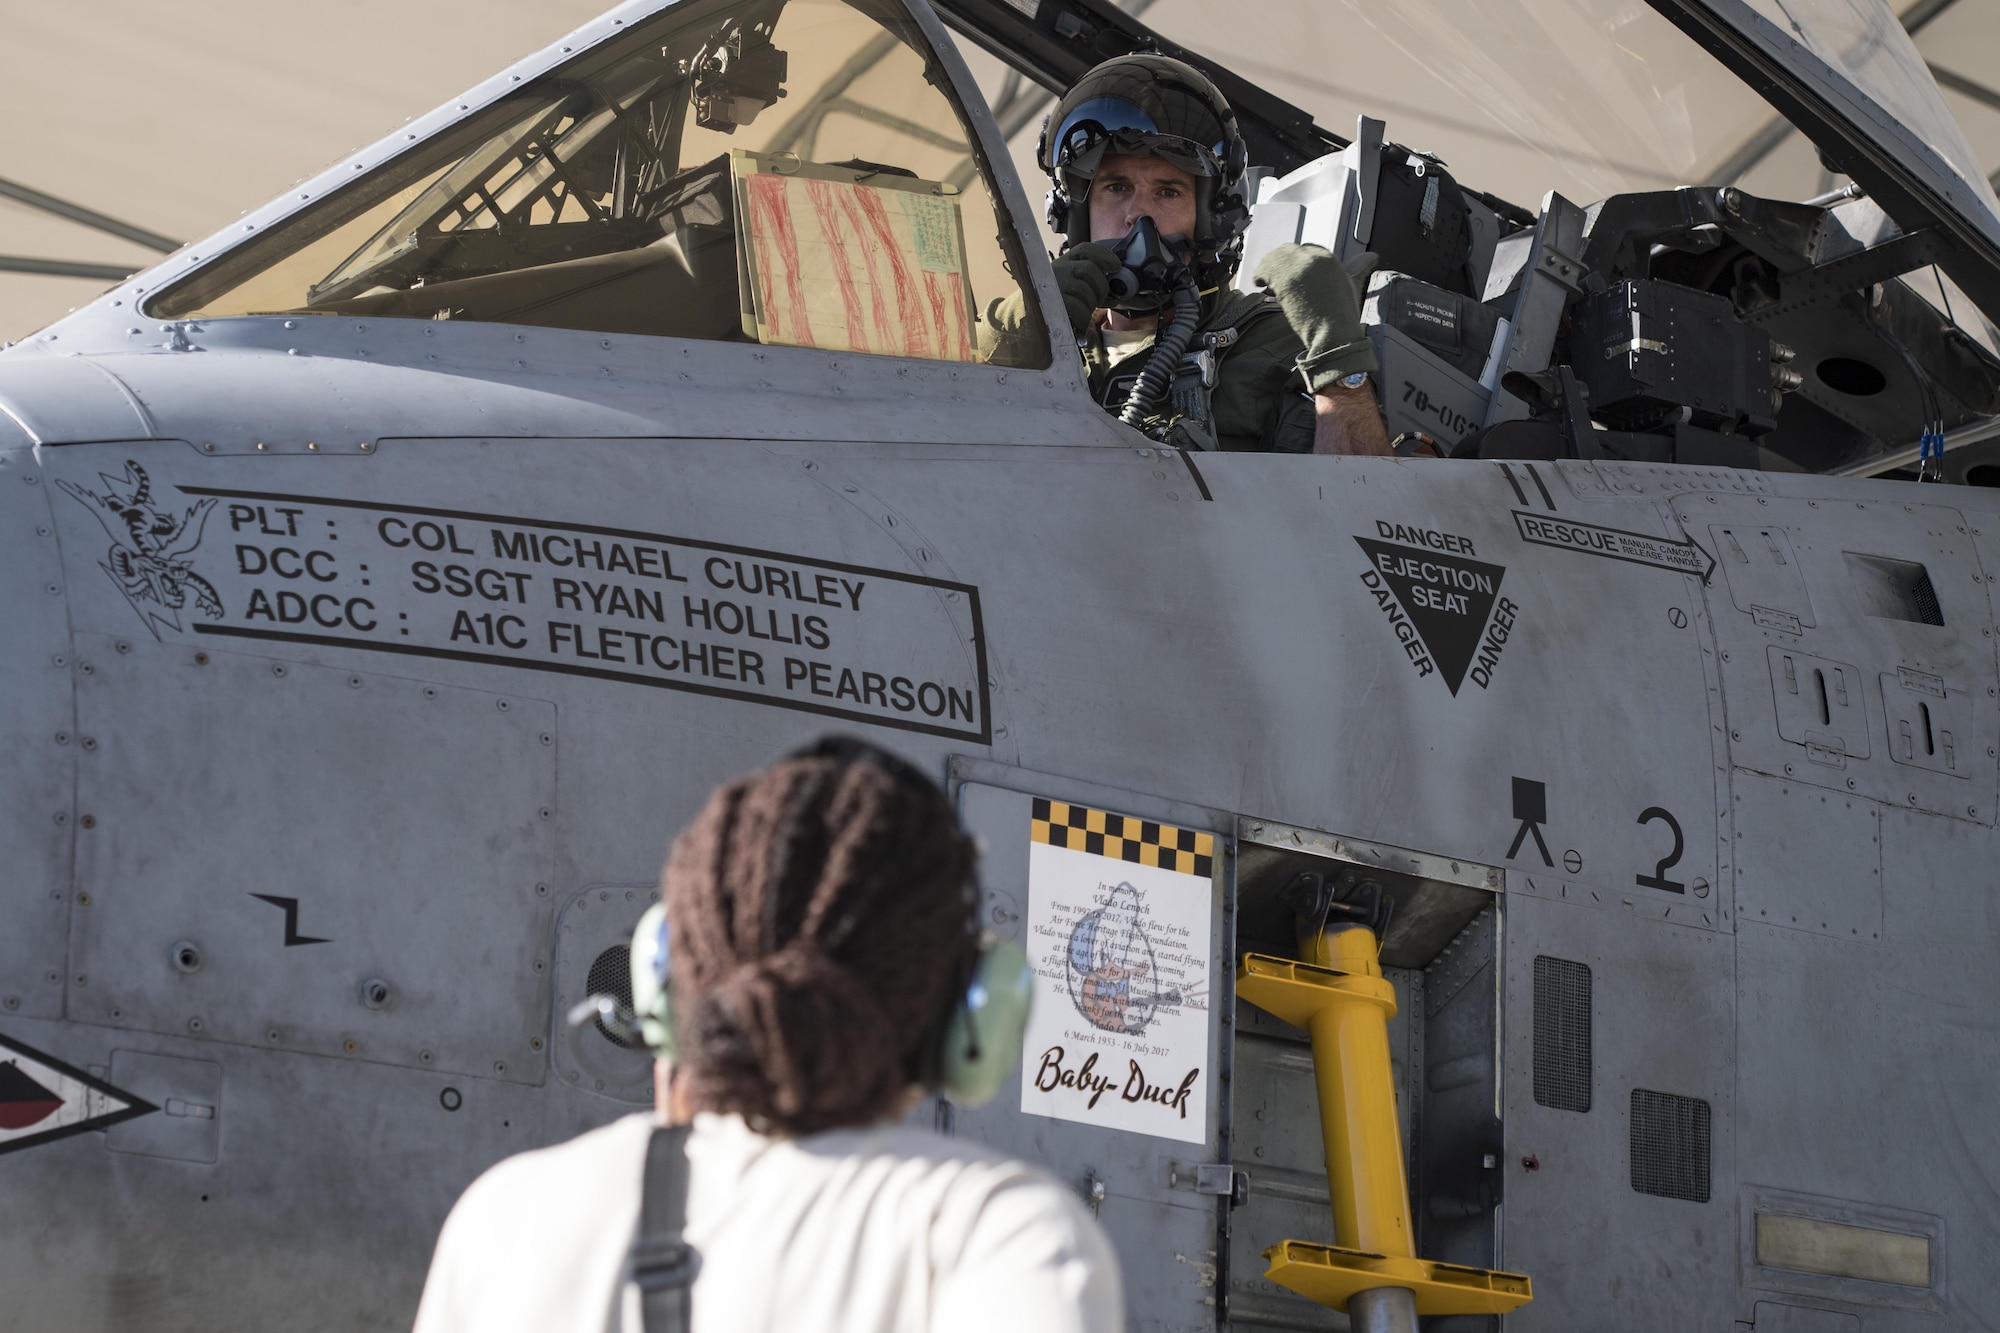 Lt. Col. Edward Balzer, 75th Fighter Squadron assistant director of operations, talks with Airman 1st Class Tori Payne, 74th Aircraft Maintenance Unit crew chief prior to takeoff, Oct. 31, 2017, at Moody Air Force Base, Ga. Pilots, traveled to Eglin AFB, Fla., to participate in exercise COMBAT HAMMER. The exercise evaluates the effectiveness, maintainability, suitability and accuracy of precision guided munitions and high technology air to ground munitions from tactical deliveries against realistic targets with realistic enemy defenses. Moody’s team will be assessed and trained on how accurately and quickly a munition is built, loaded onto the aircraft and dropped from the aircraft onto a target. (U.S. Air Force photo by Senior Airman Janiqua P. Robinson)